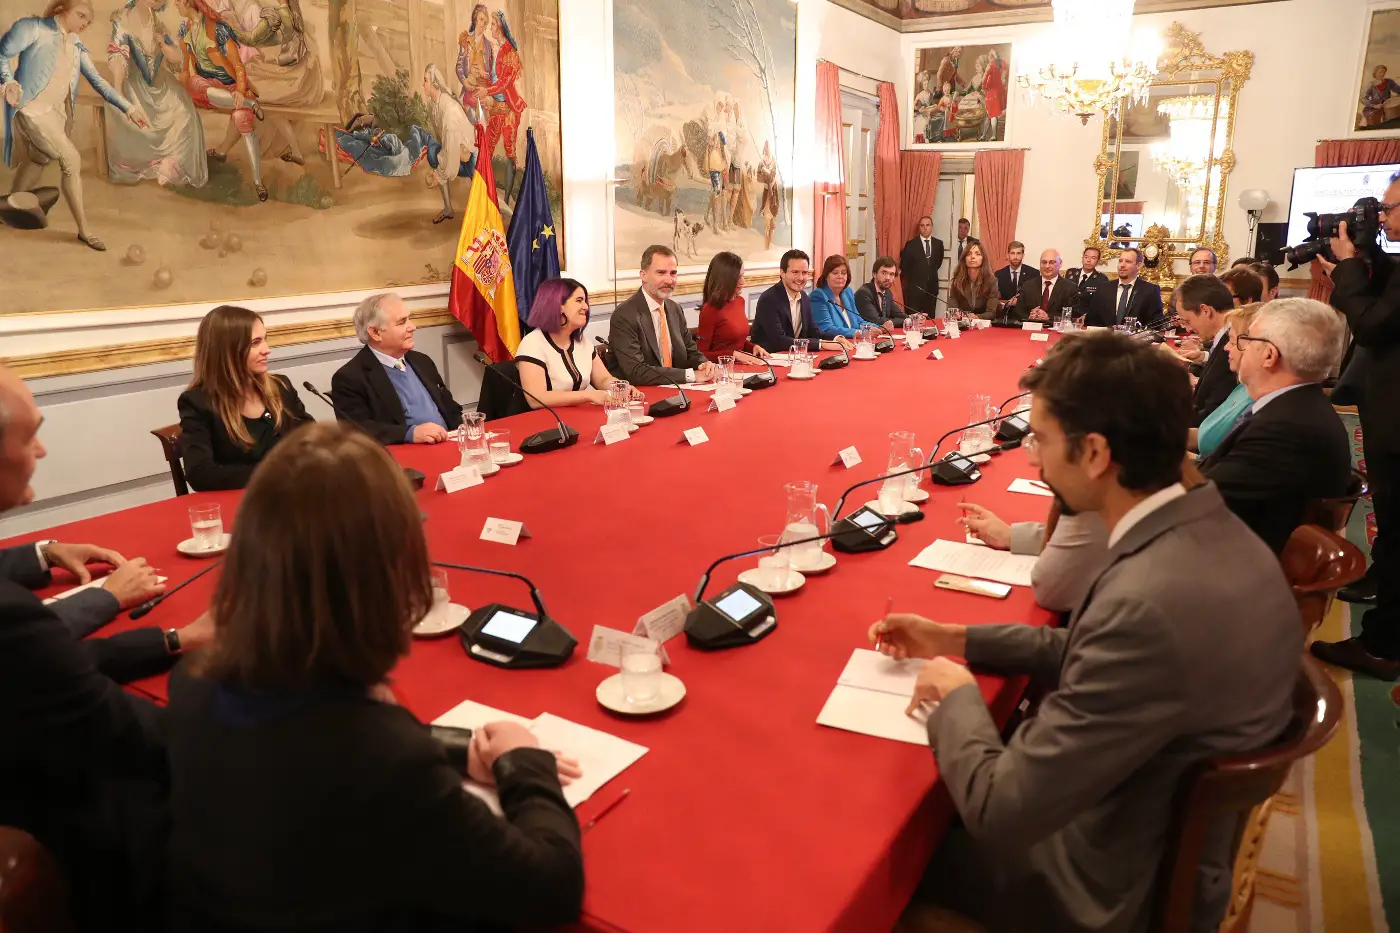 Felipe and Letizia with Scientists in a meeting at Palace